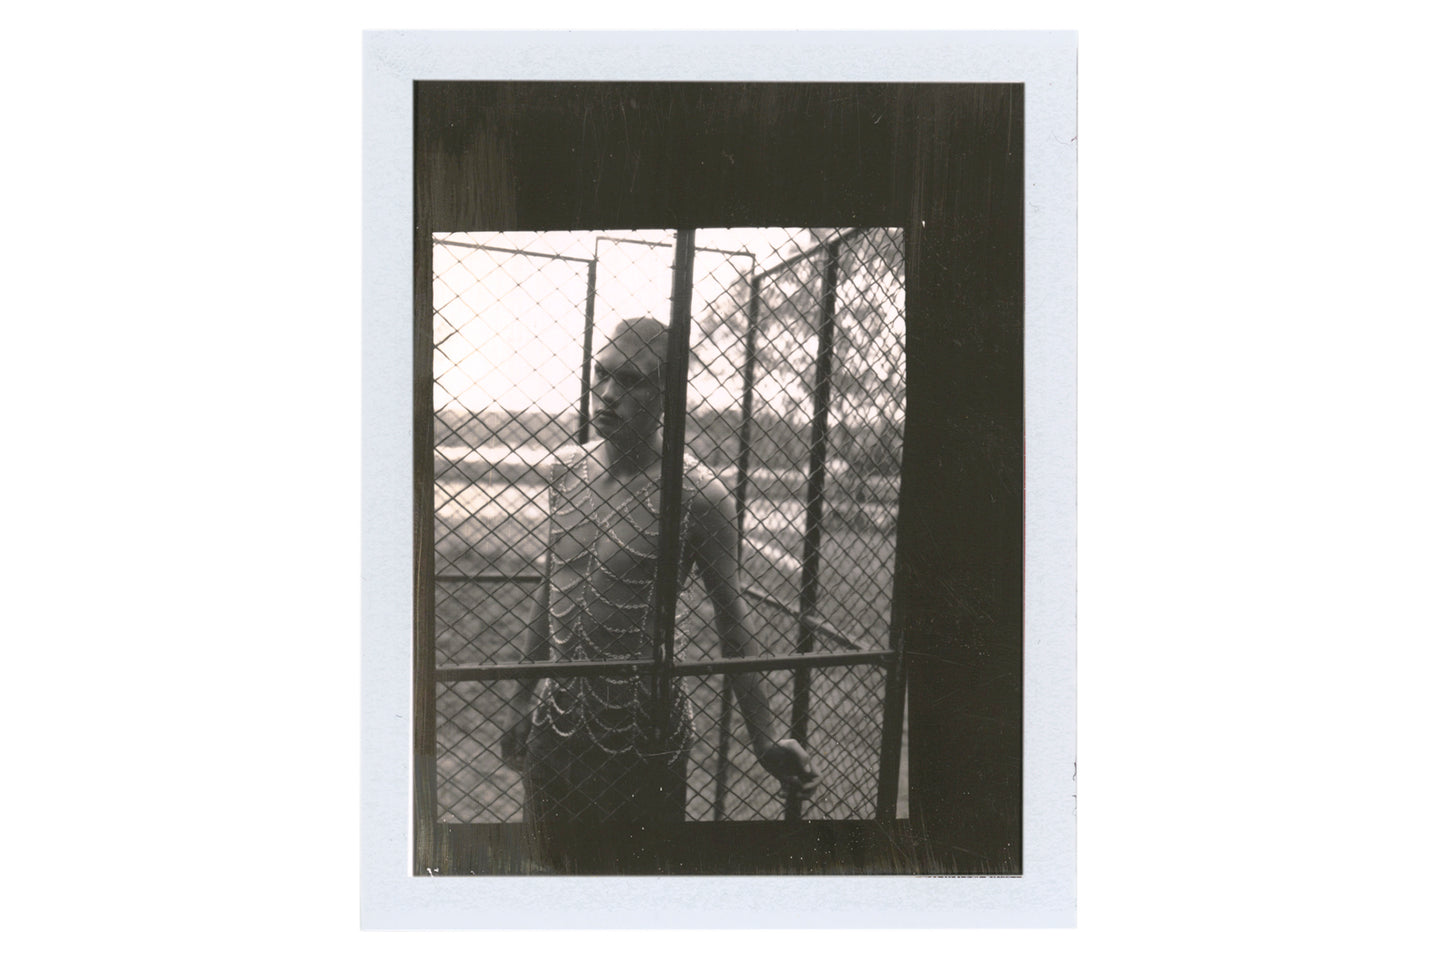 Boy in Cage, 1995